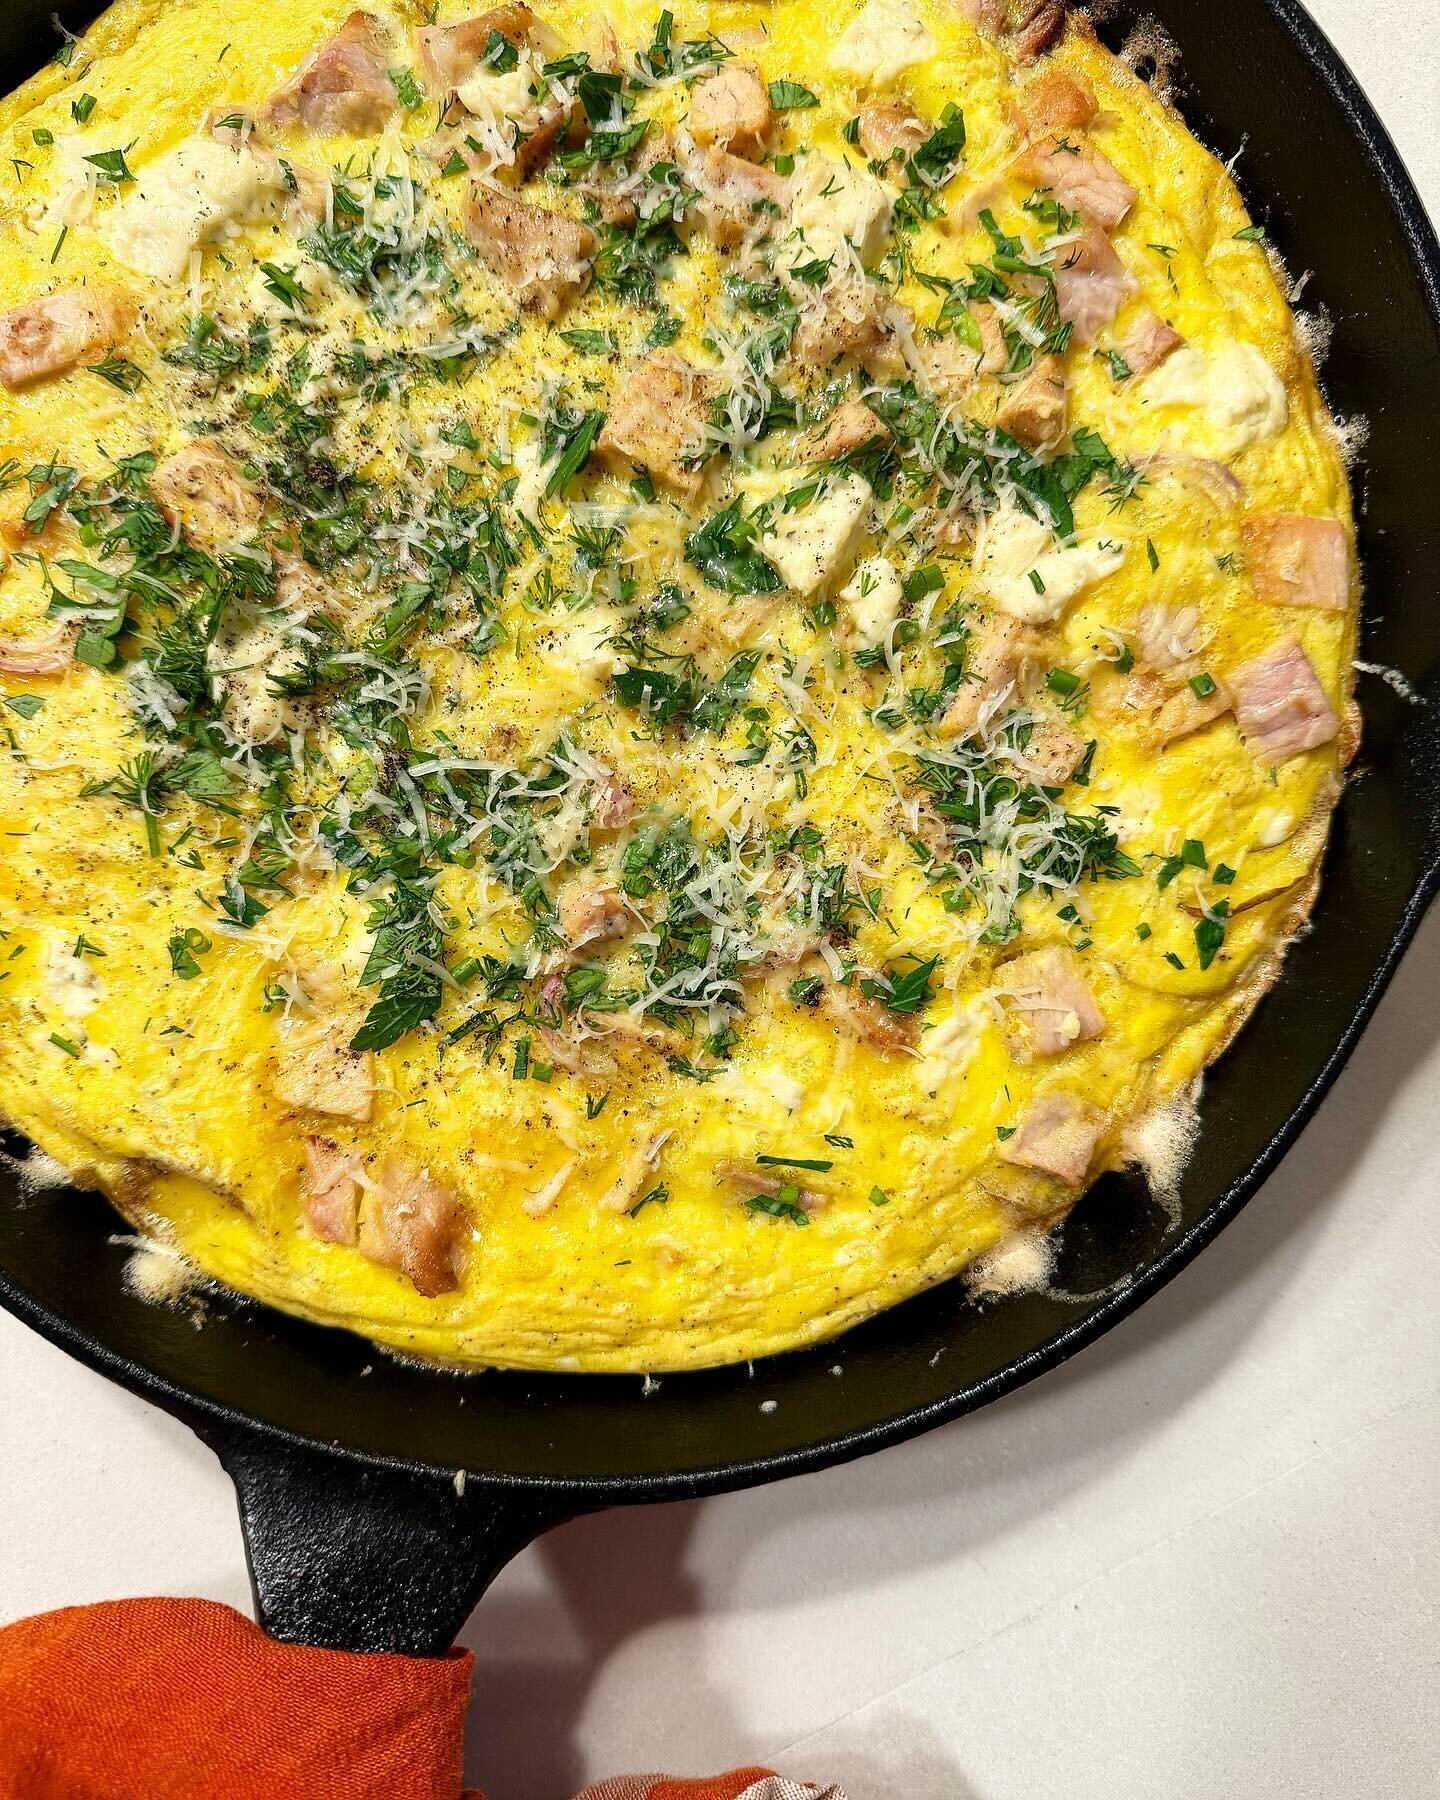 Frittatas are a great use of leftovers! 

The bottom is layered with some of those Yukon Gold potatoes we harvested this past summer. Then we mixed up our farm fresh eggs with our lightly smoked ham (nitrate free), garden shallots and Boursin cheese.